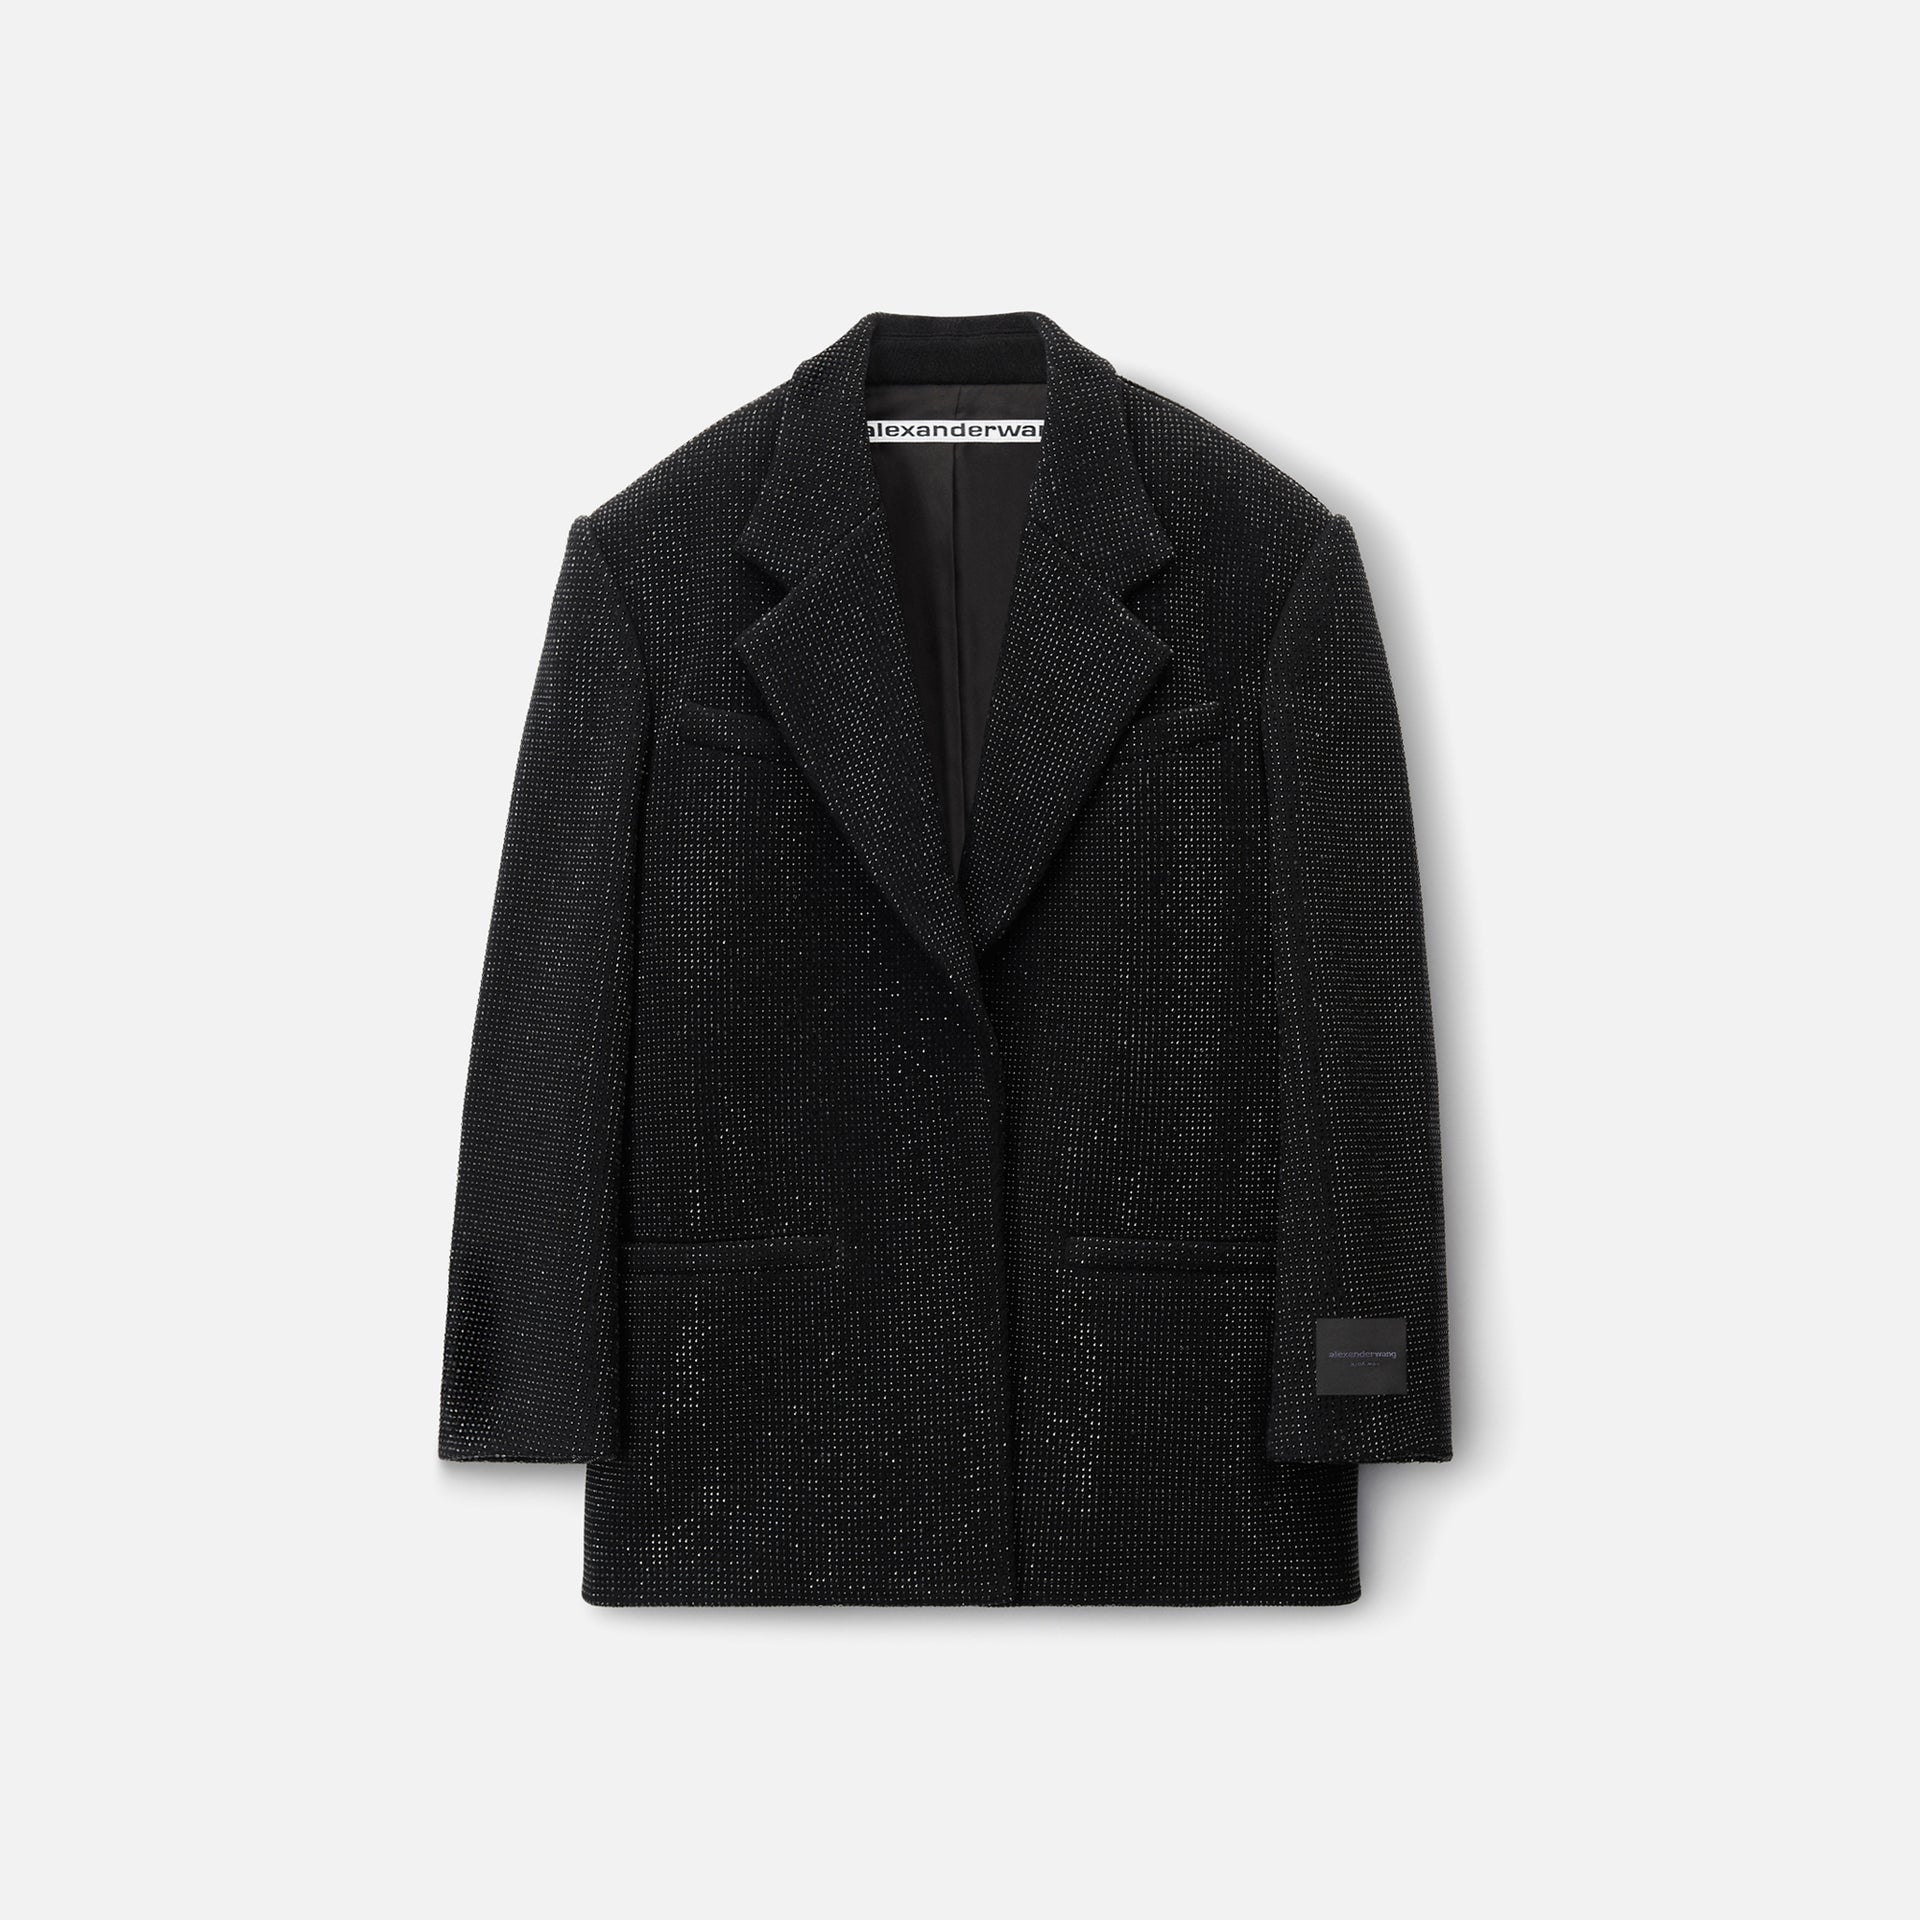 Alexander Wang Boxy Tailored Jacket with Embellishments and Sleeve Label - Black